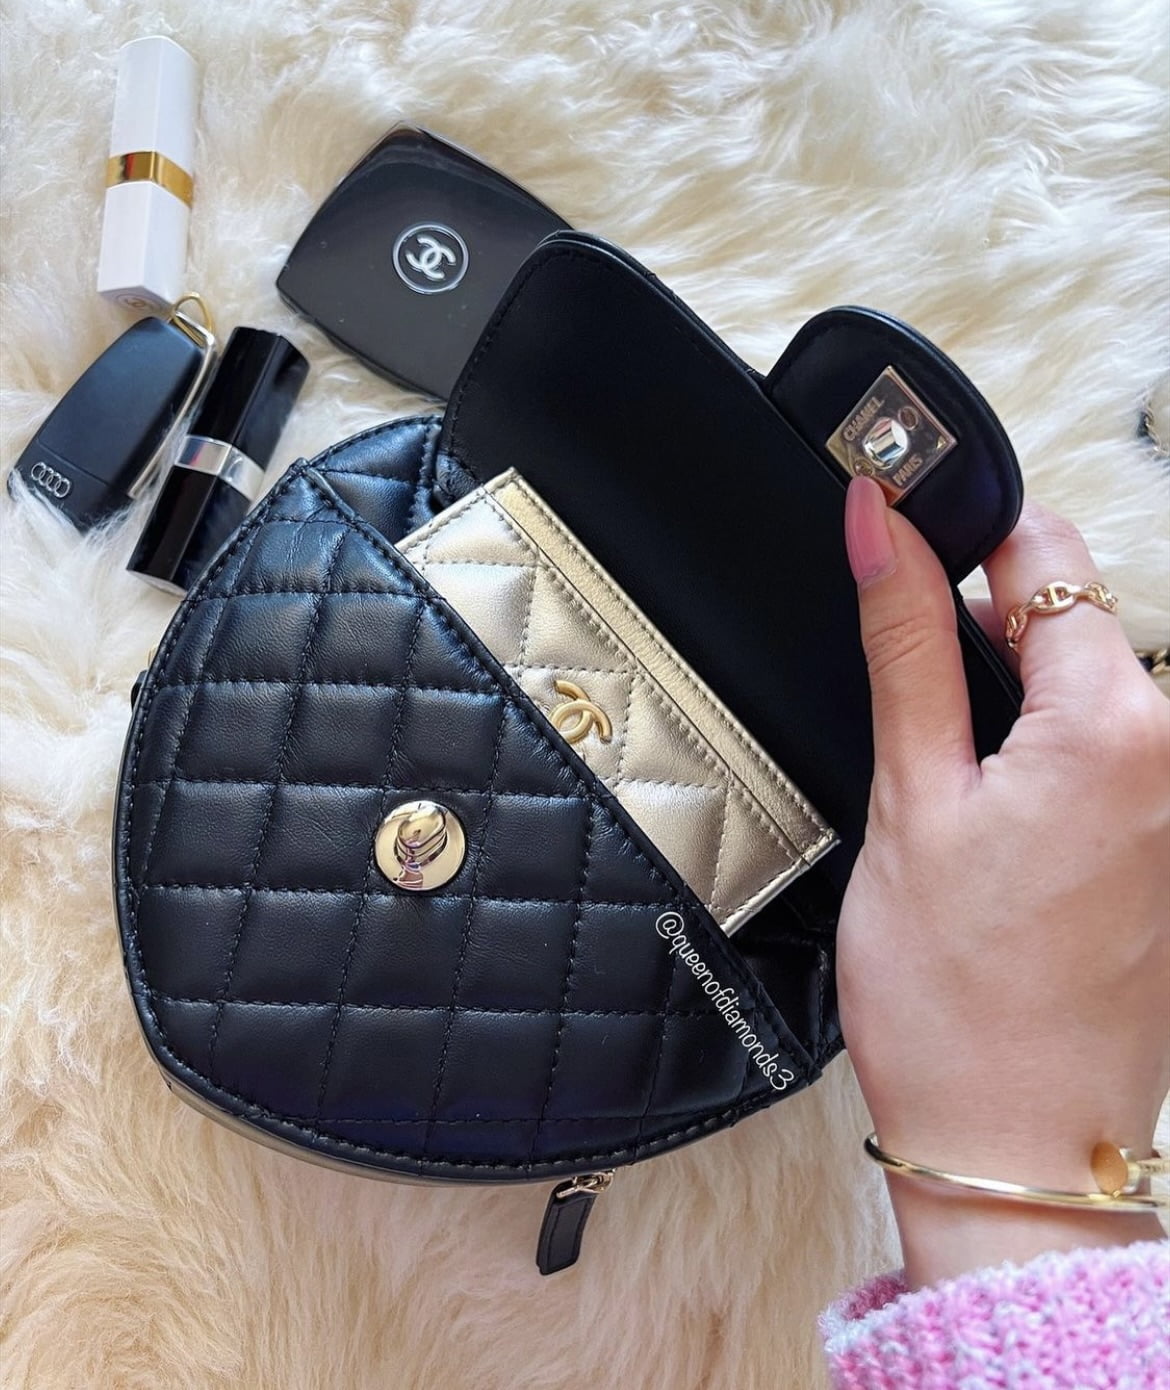 The New Chanel Heart Bag With Wallet Section & Pockets, Is